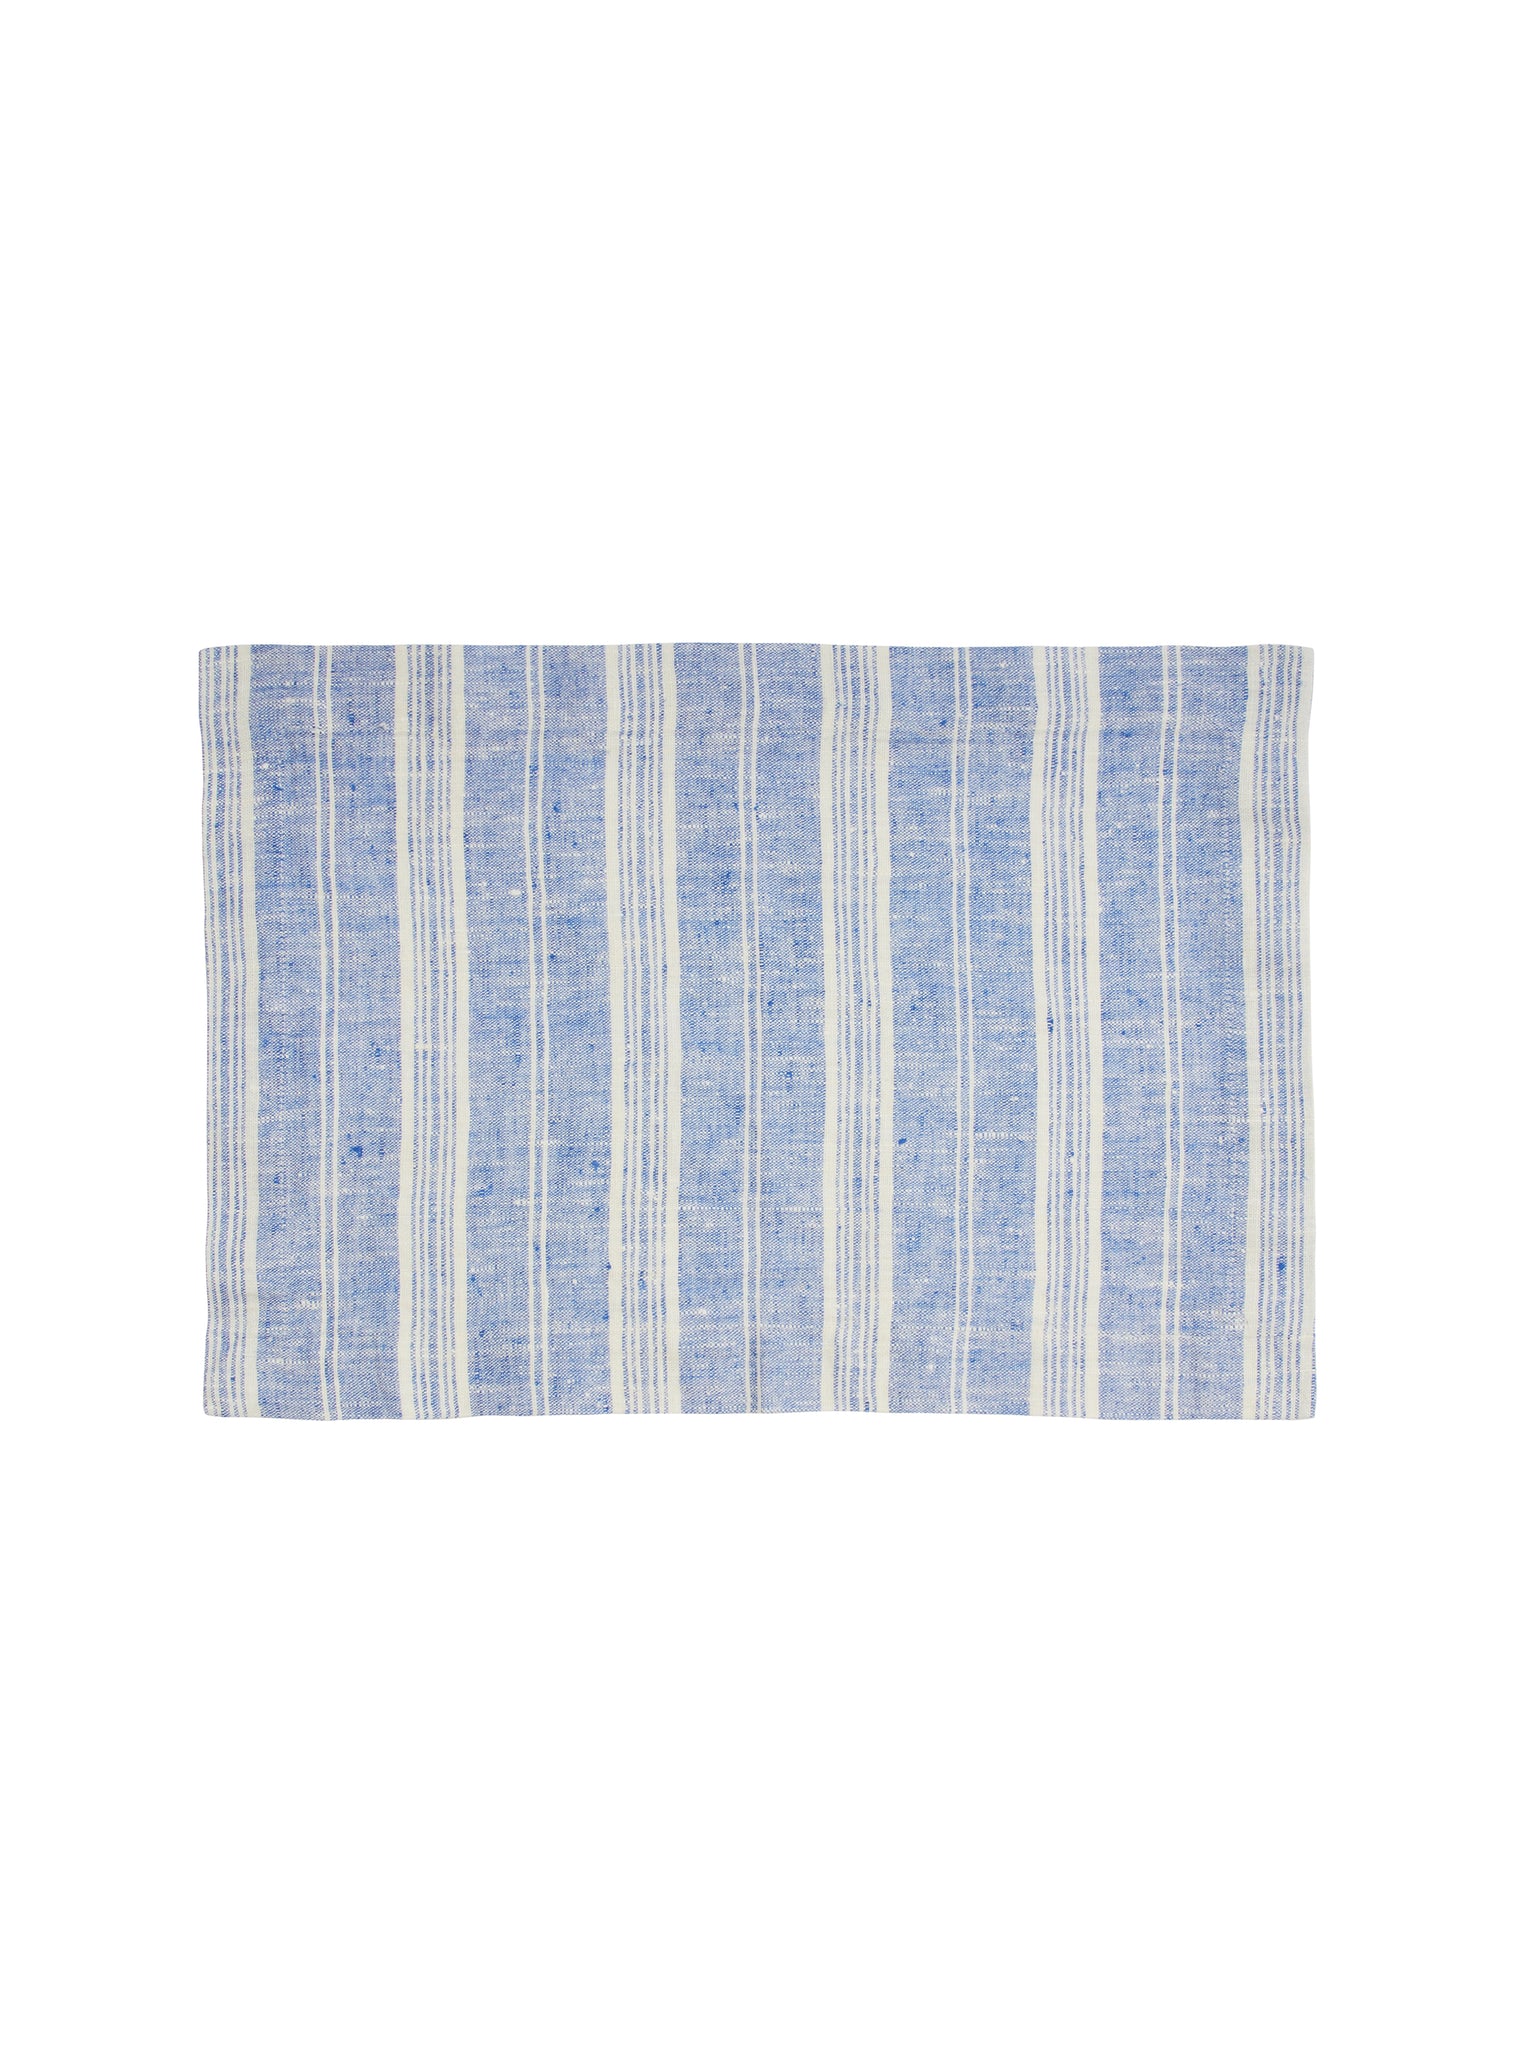 Montauk Linen Collection Placemat Weston Table